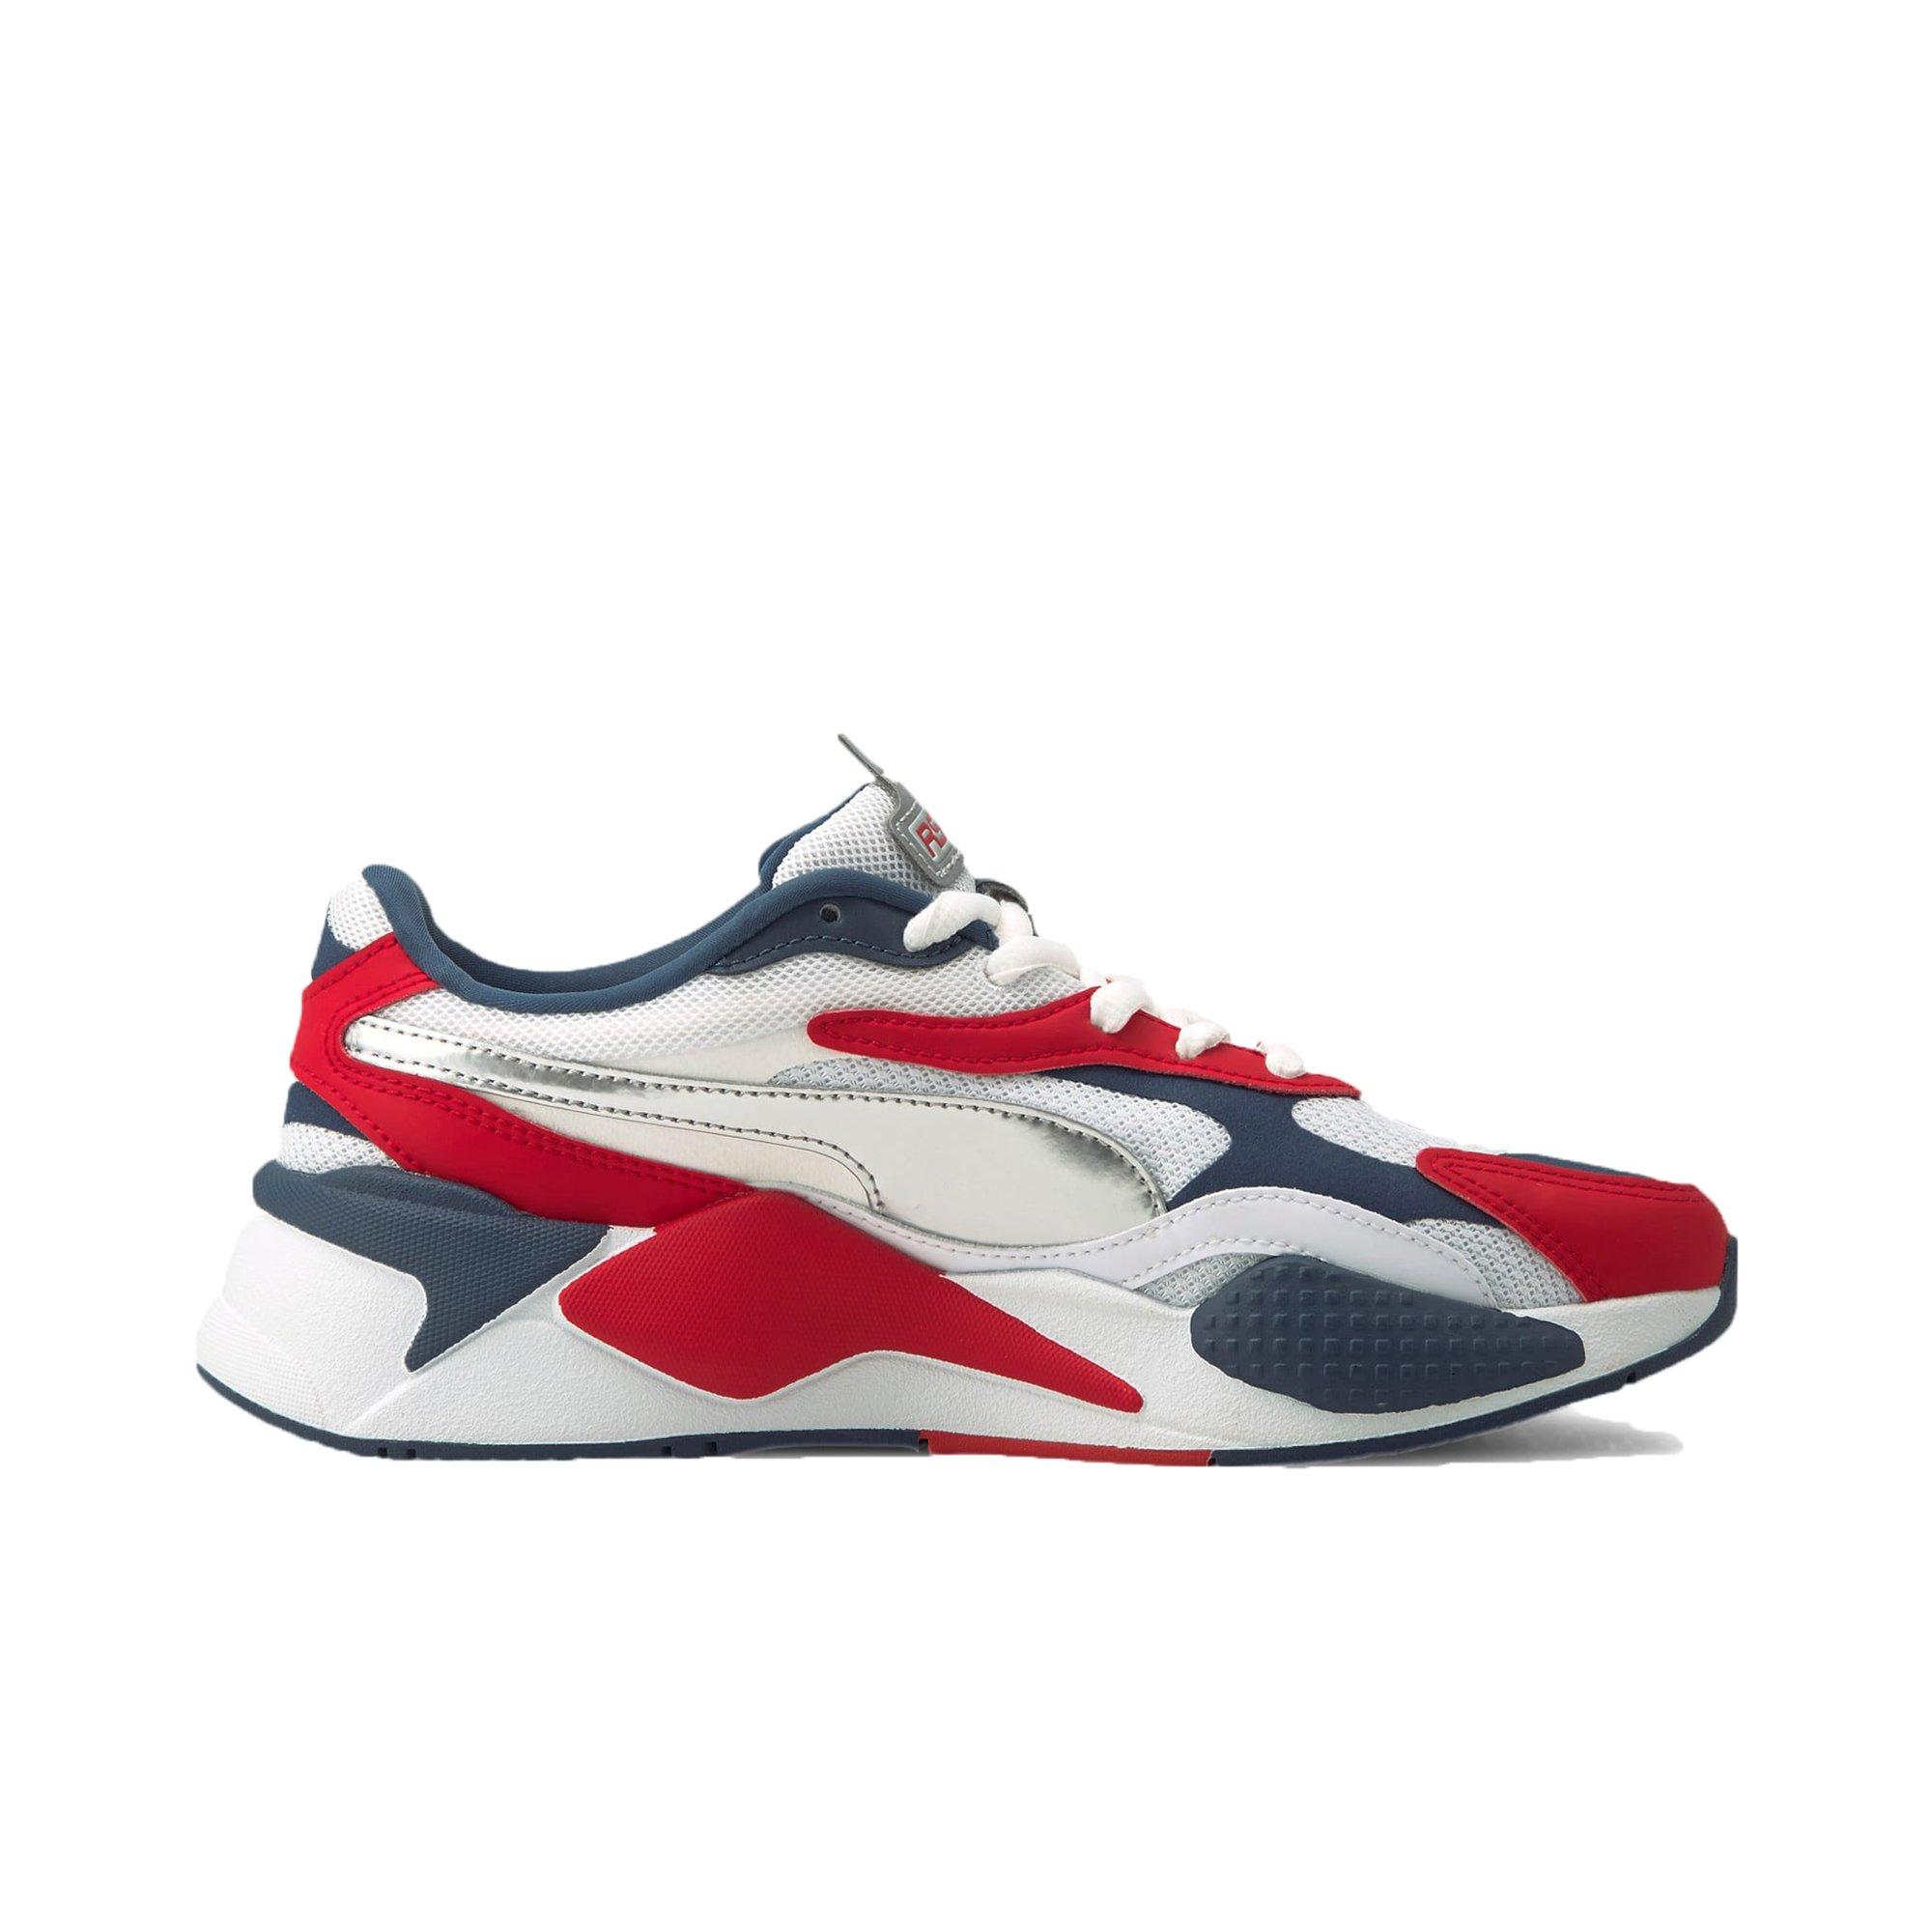 Red White And Blue Puma Rsx | vlr.eng.br